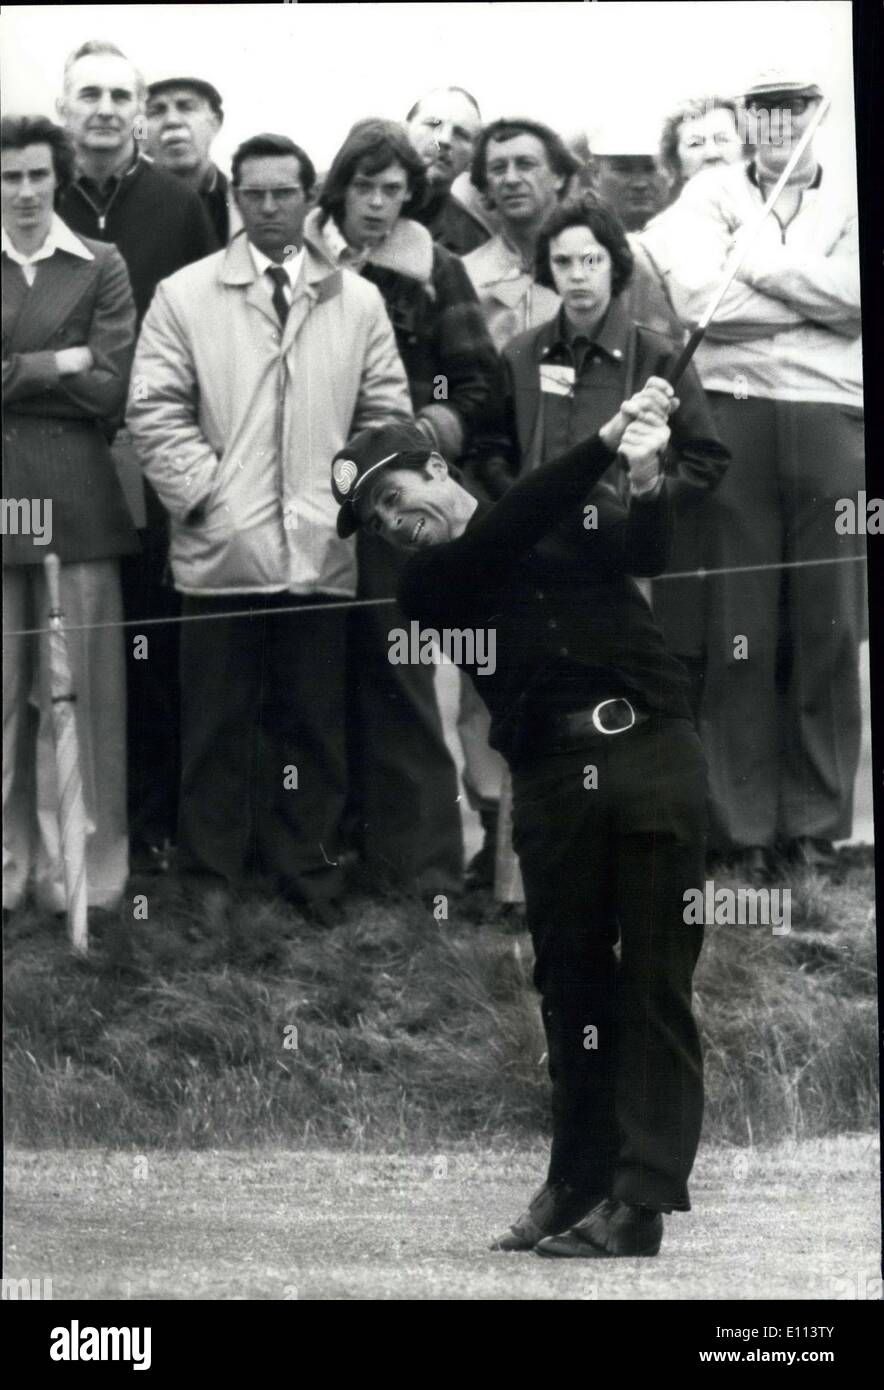 Jul. 09, 1975 - British open at Carnoustie: Photo Shows Gary Player (SA) drives off during the first round of the British open at Carnoustie, yesterday he finished with a 75. Stock Photo